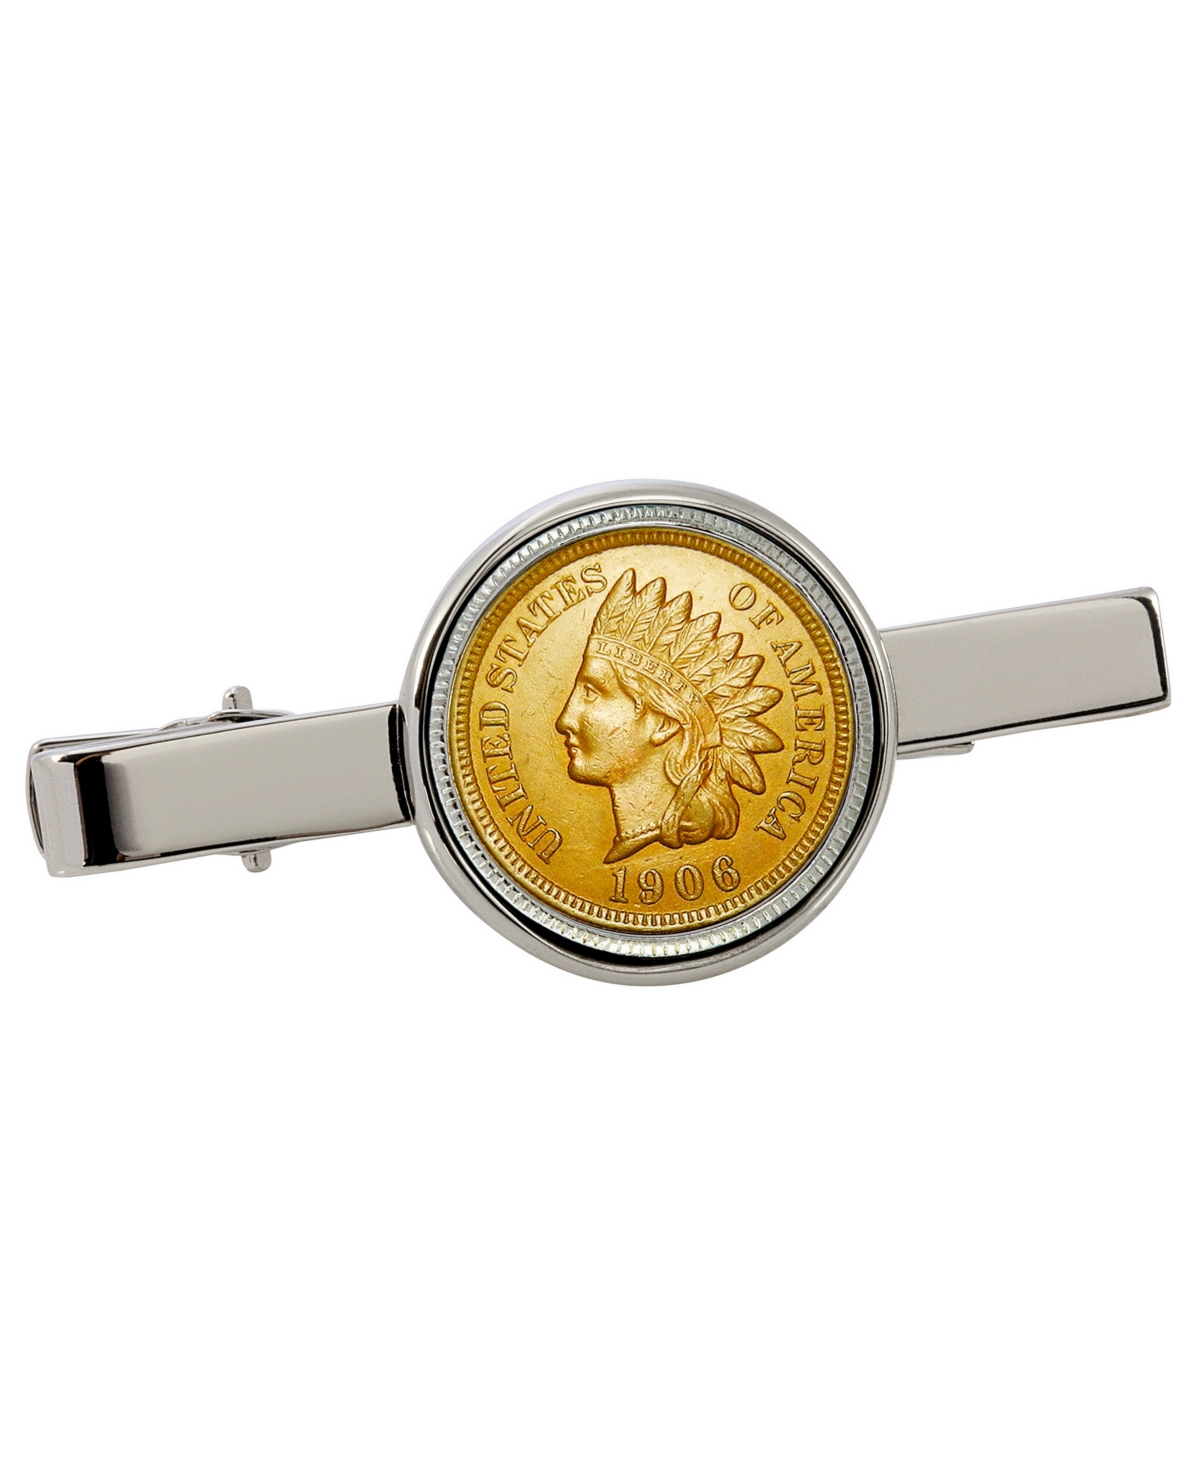 Gold-Layered Indian Penny Coin Tie Clip - Silver